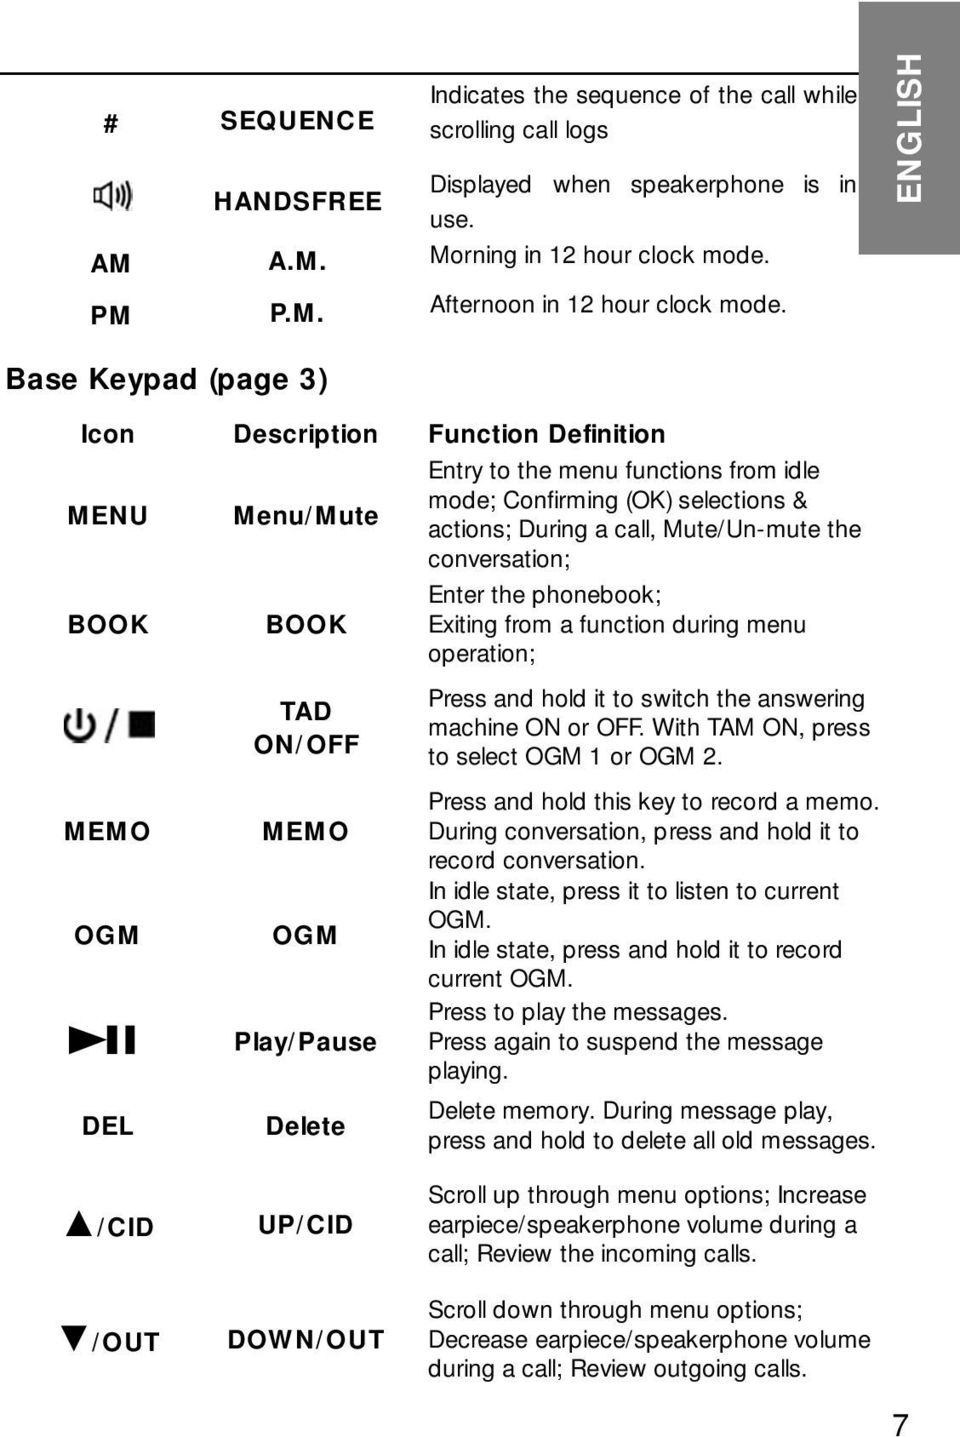 conversation; BOOK BOOK Enter the phonebook; Exiting from a function during menu operation; MEMO OGM DEL TAD ON/OFF MEMO OGM Play/Pause Delete Press and hold it to switch the answering machine ON or